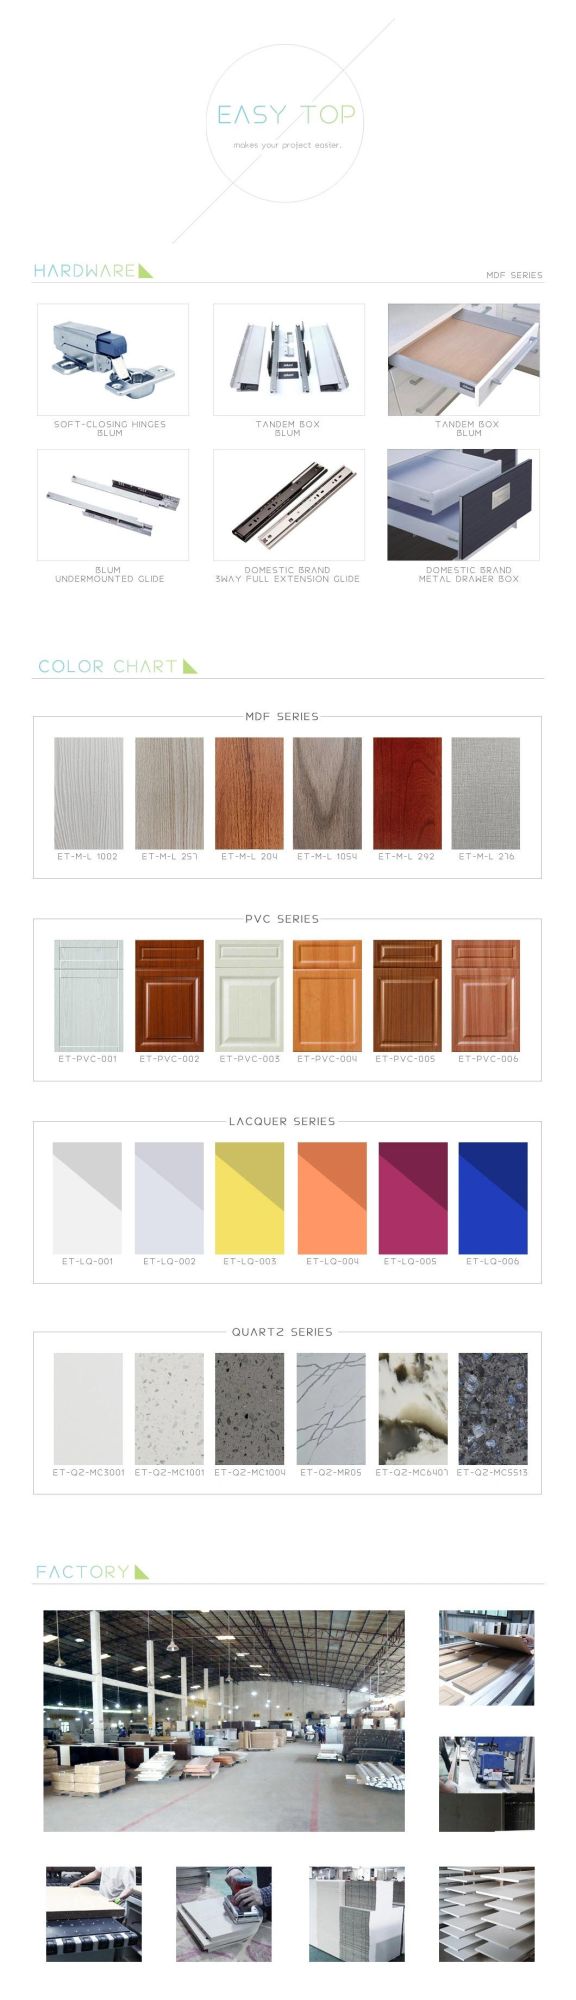 L-Shaped Hot Sale Home Furniture MDF Countertop Full Exposed Side Panel Kitchen Shaker Cabinets